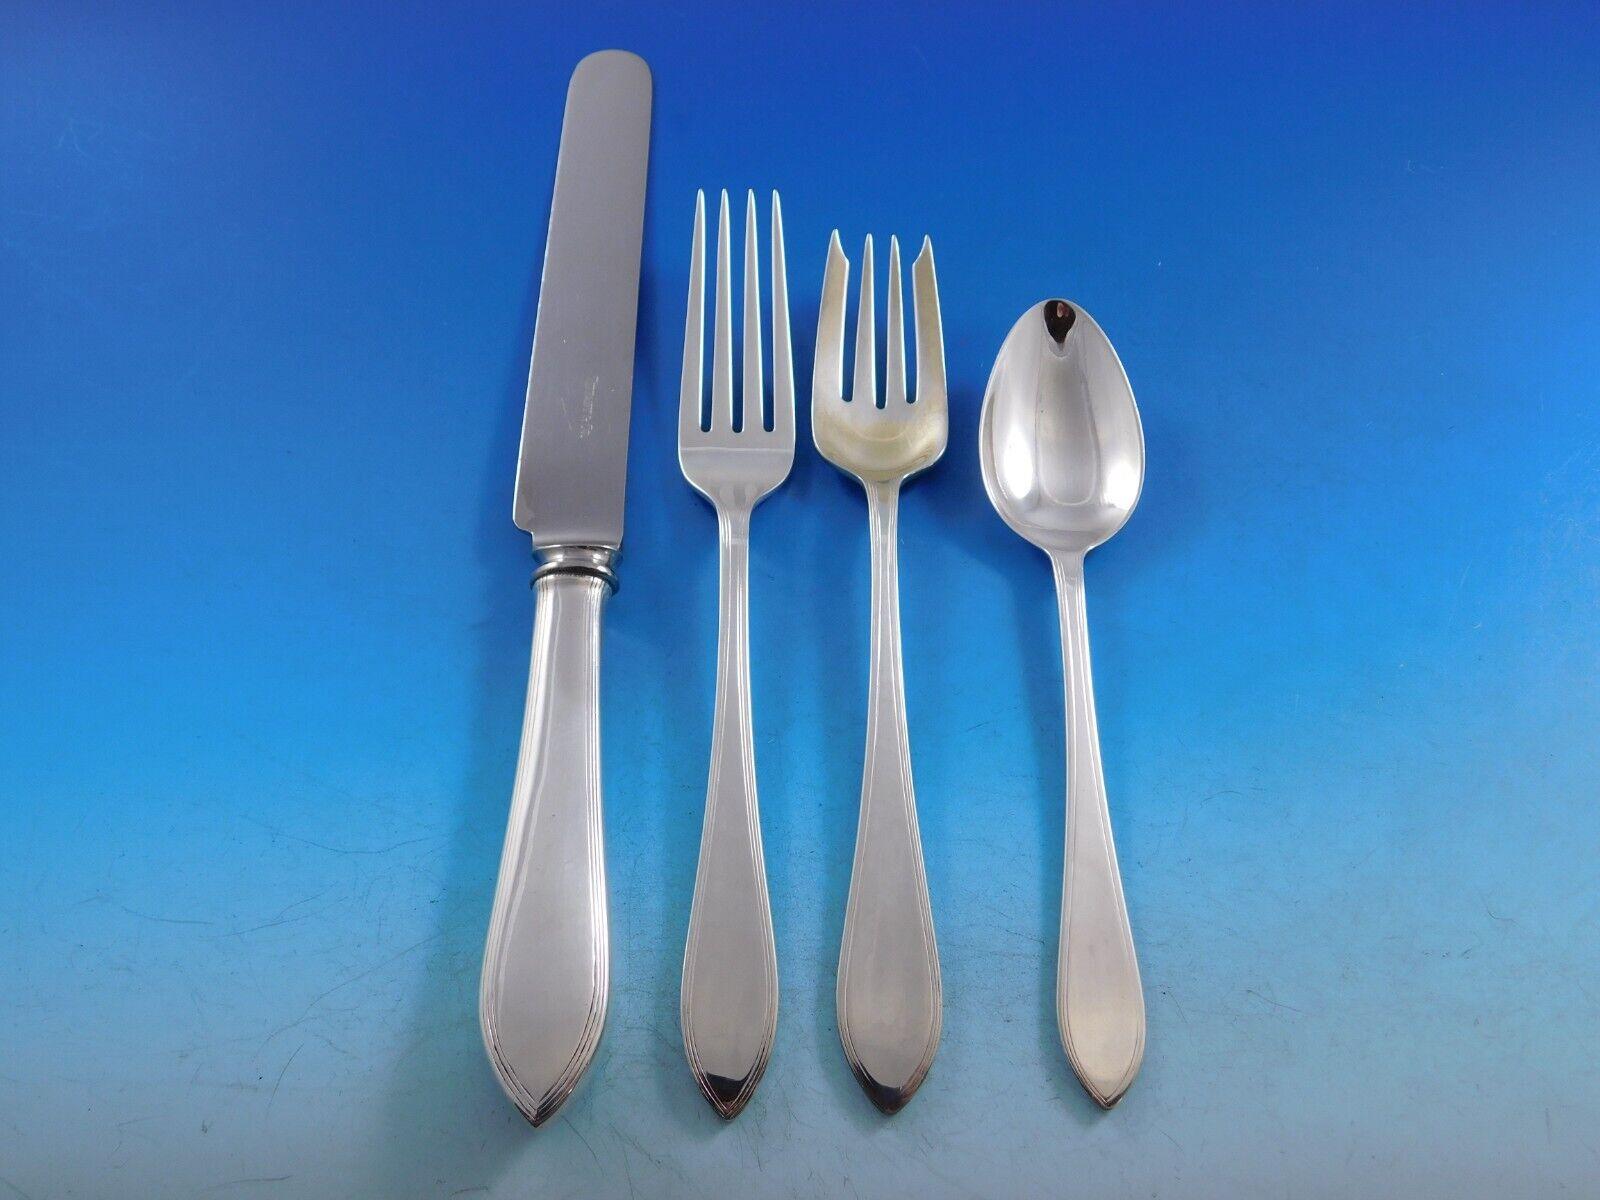 Reeded Edge by Tiffany and Co. sterling silver Flatware set, 101 pieces. This pattern was introduced by Tiffany in the year 1937 and features a classic timeless Queen Anne design with a stamped reeded border. This set includes:

8 Regular Knives